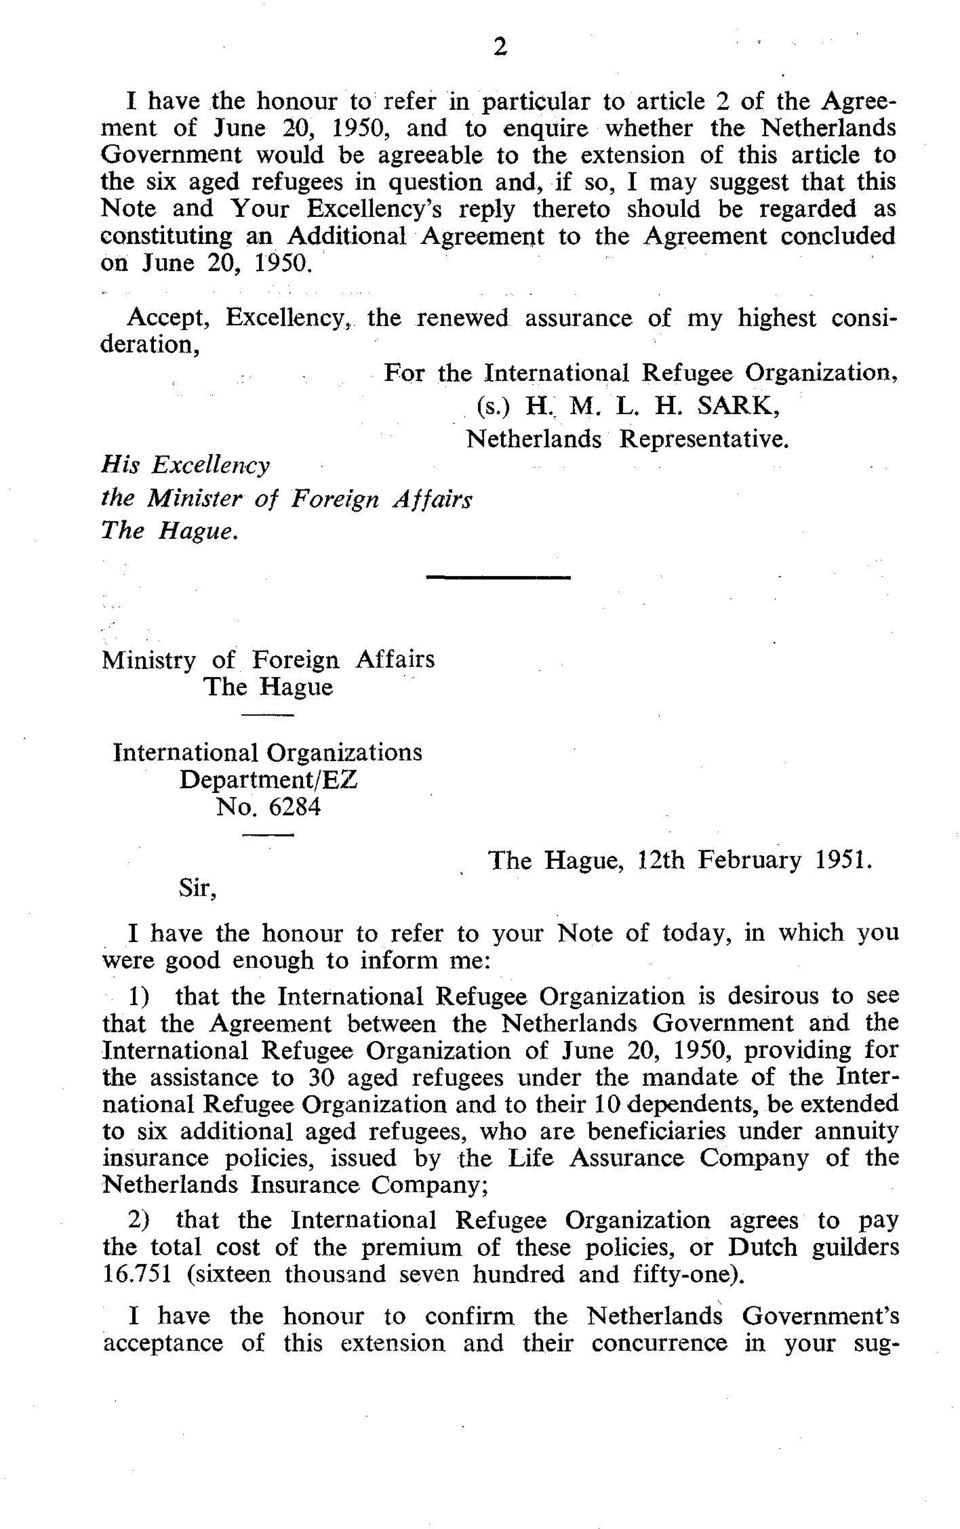 June 20, 1950. Accept, Excellency, the renewed assurance of my highest consideration, For the International Refugee Organization, (s.) H. M. L. H. SARK, Netherlands Representative.